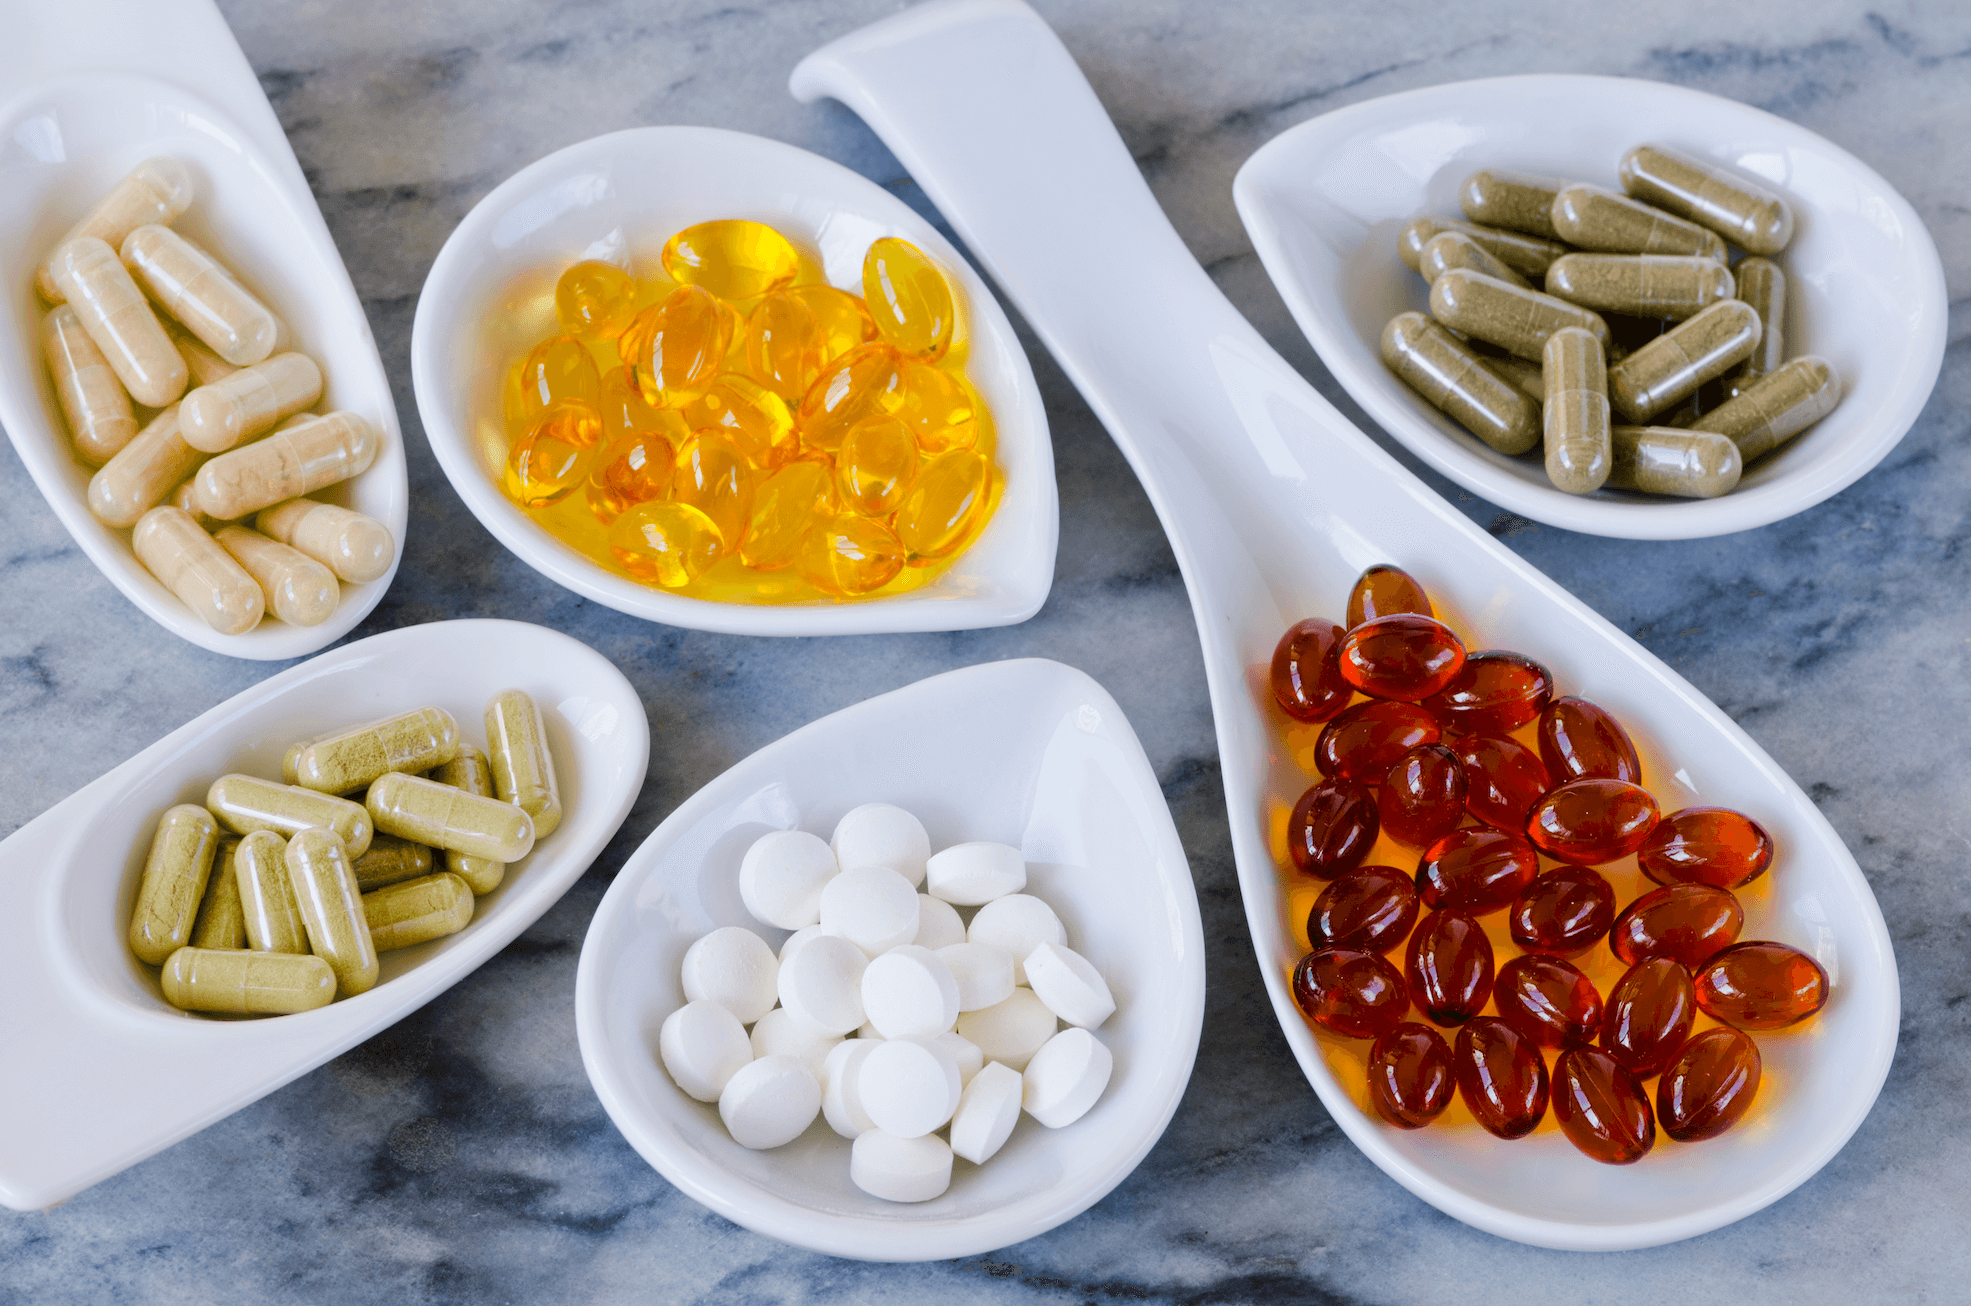 Cost-Effective Supplements: How Do You Decide?